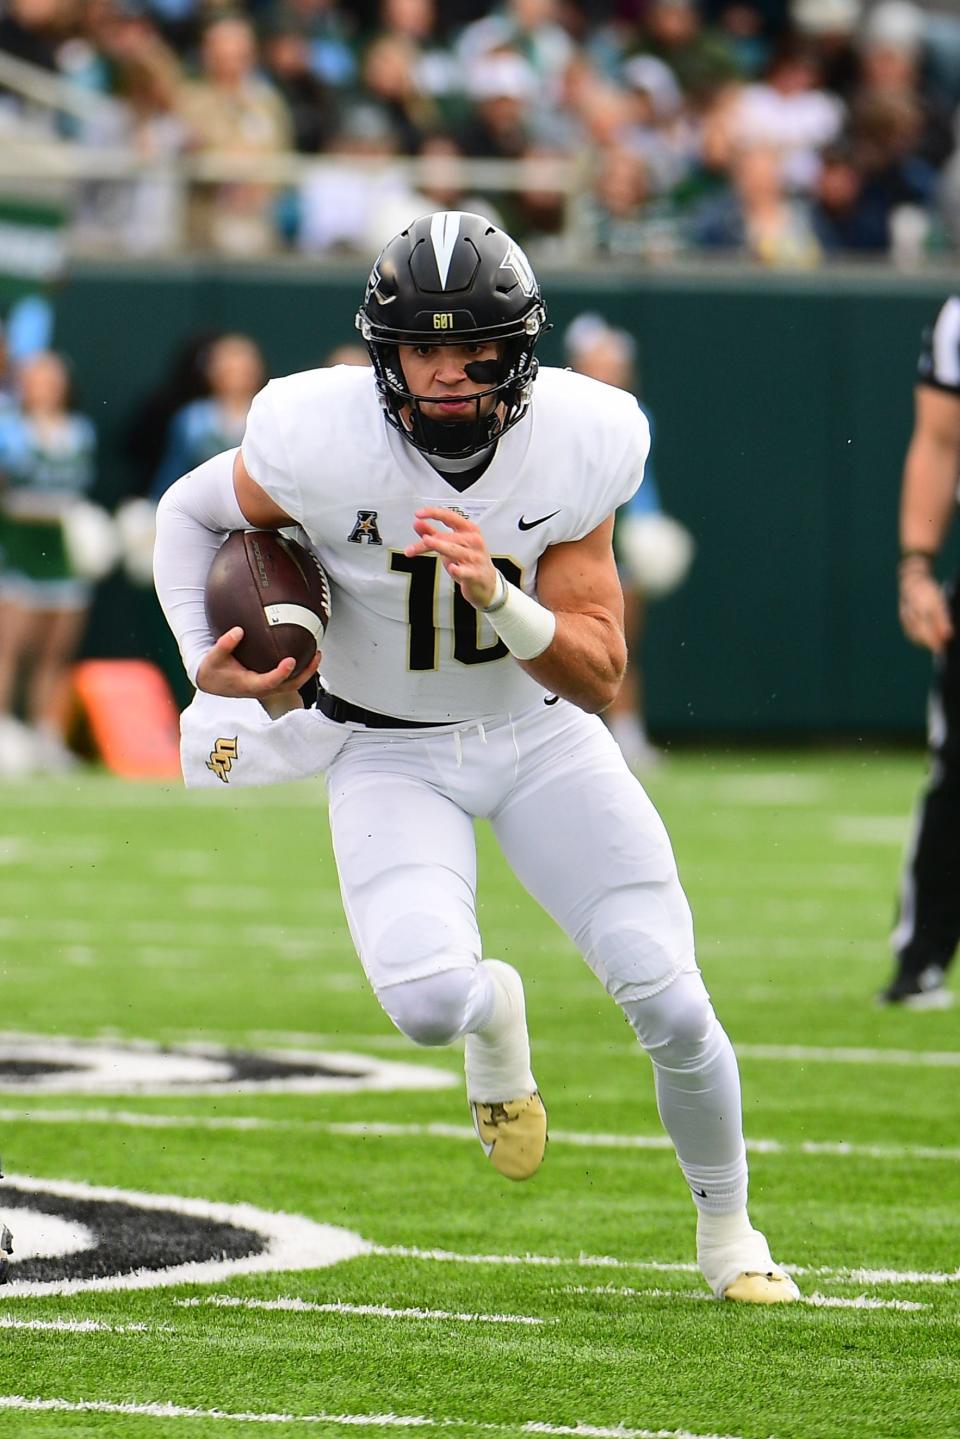 Quarterback John Rhys Plumlee will lead UCF into its inaugural Big 12 Conference season, but do any Knights crack our preseason predictions for awards and titles?